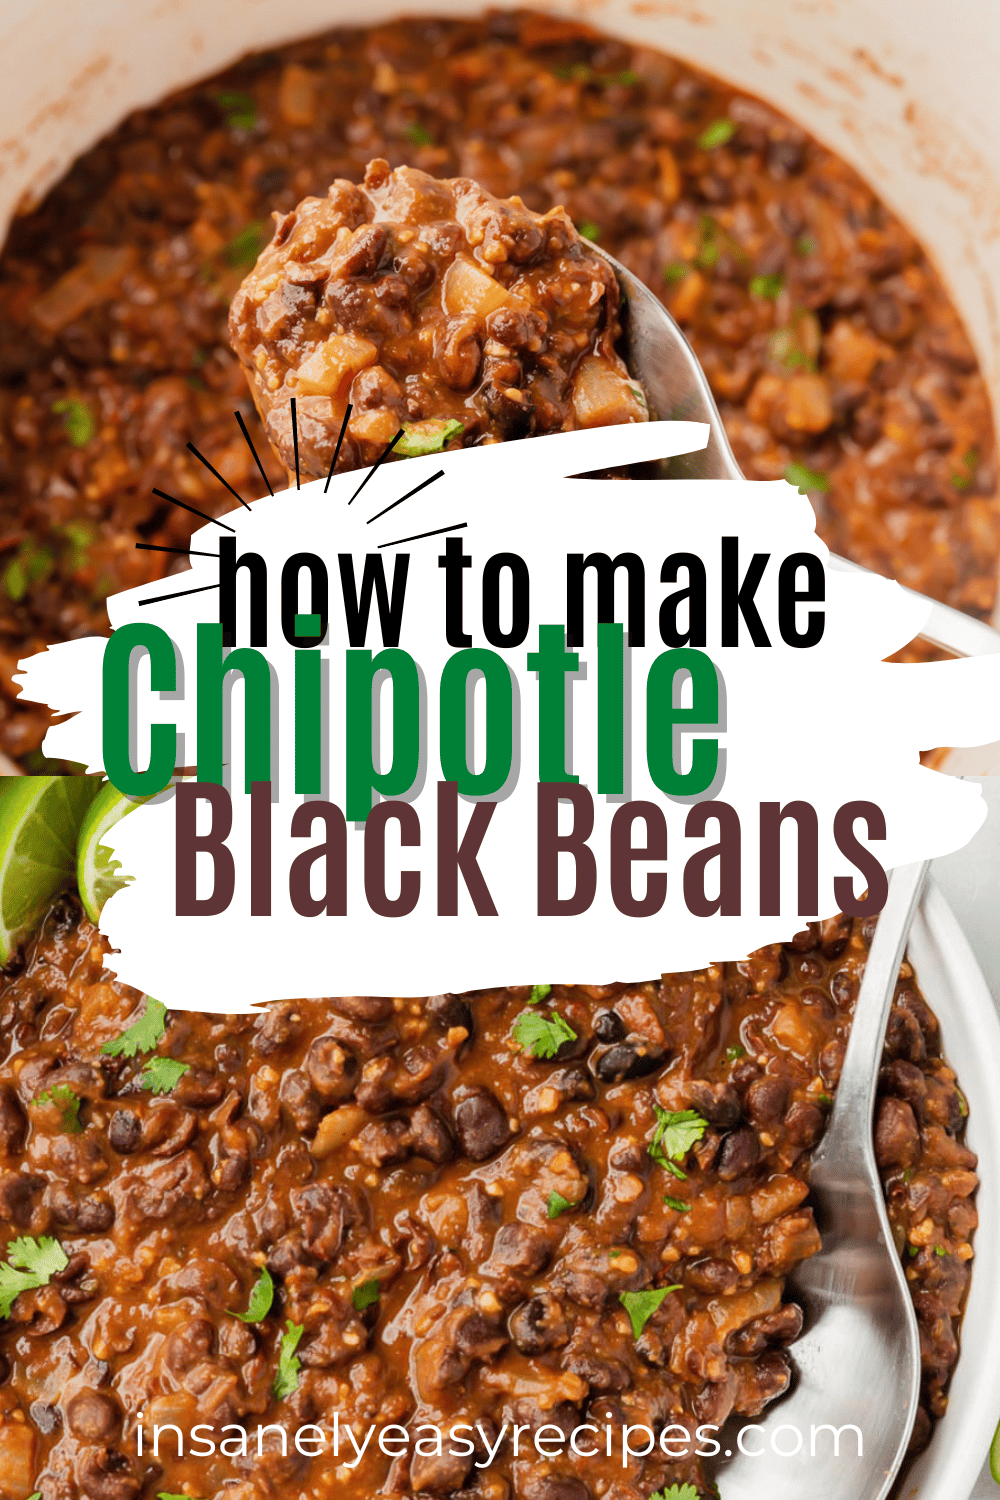 images of chipotle seasoned black beans. Text in a white swoosh over the image says "how to make chipotle black beans"